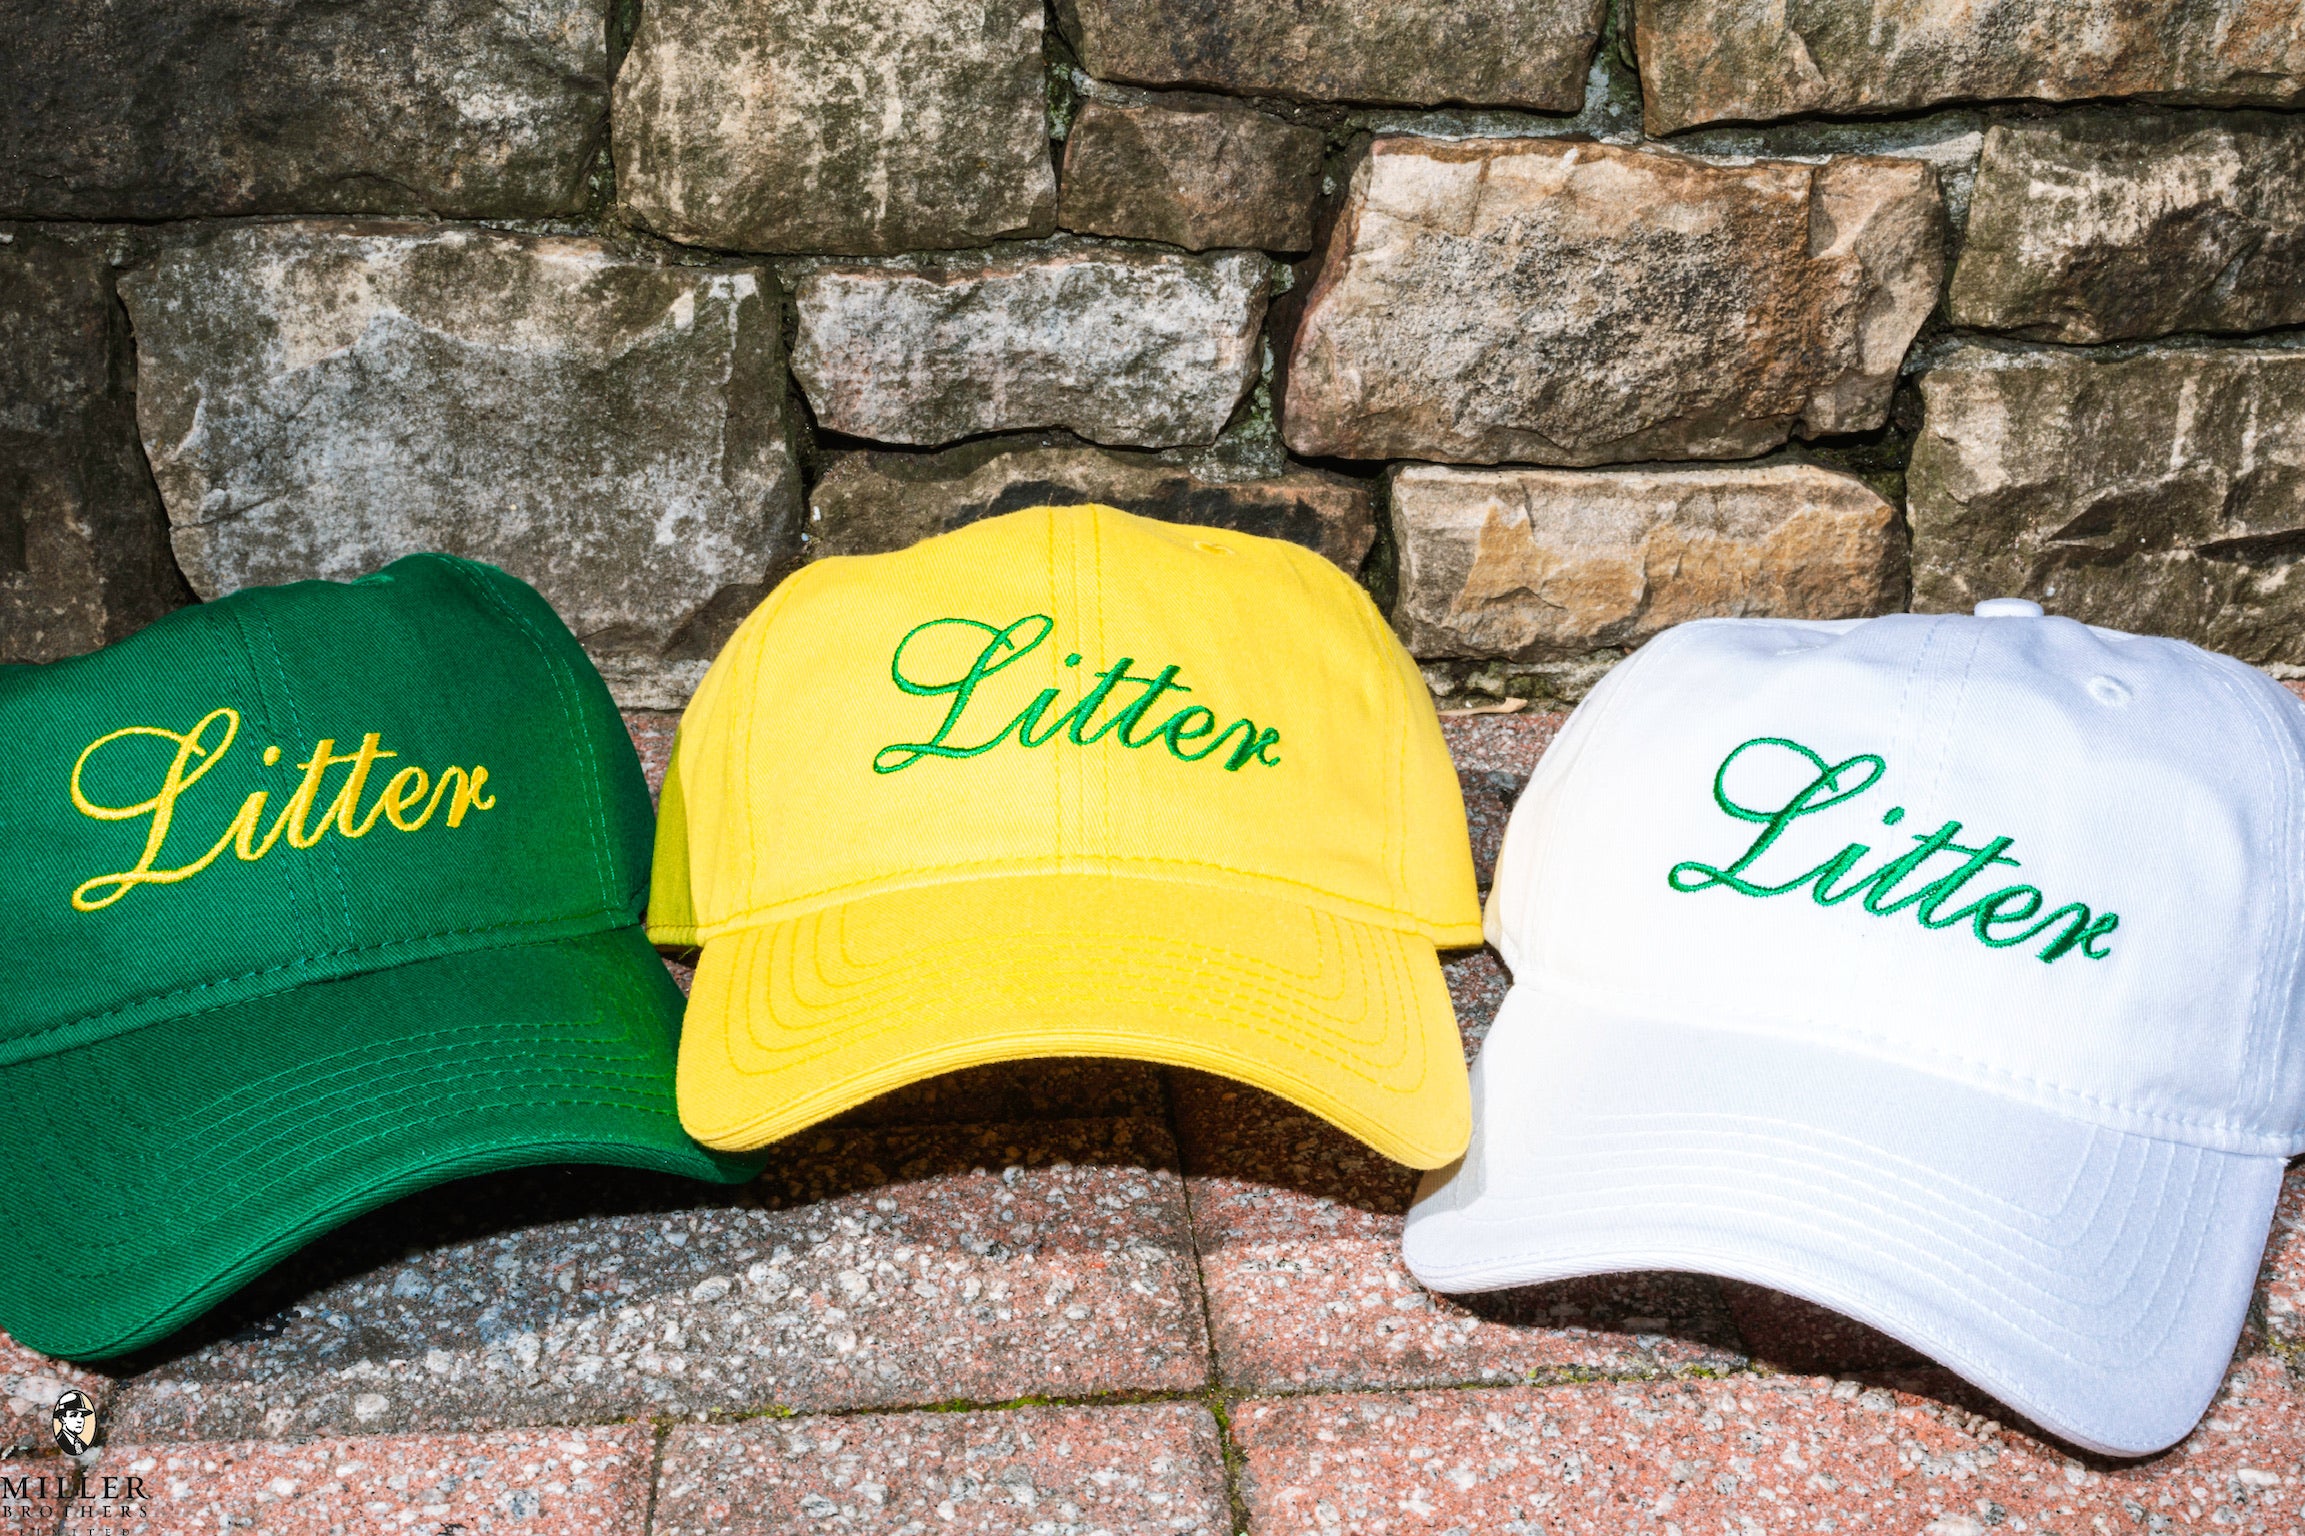 Masters "Litter" Hat